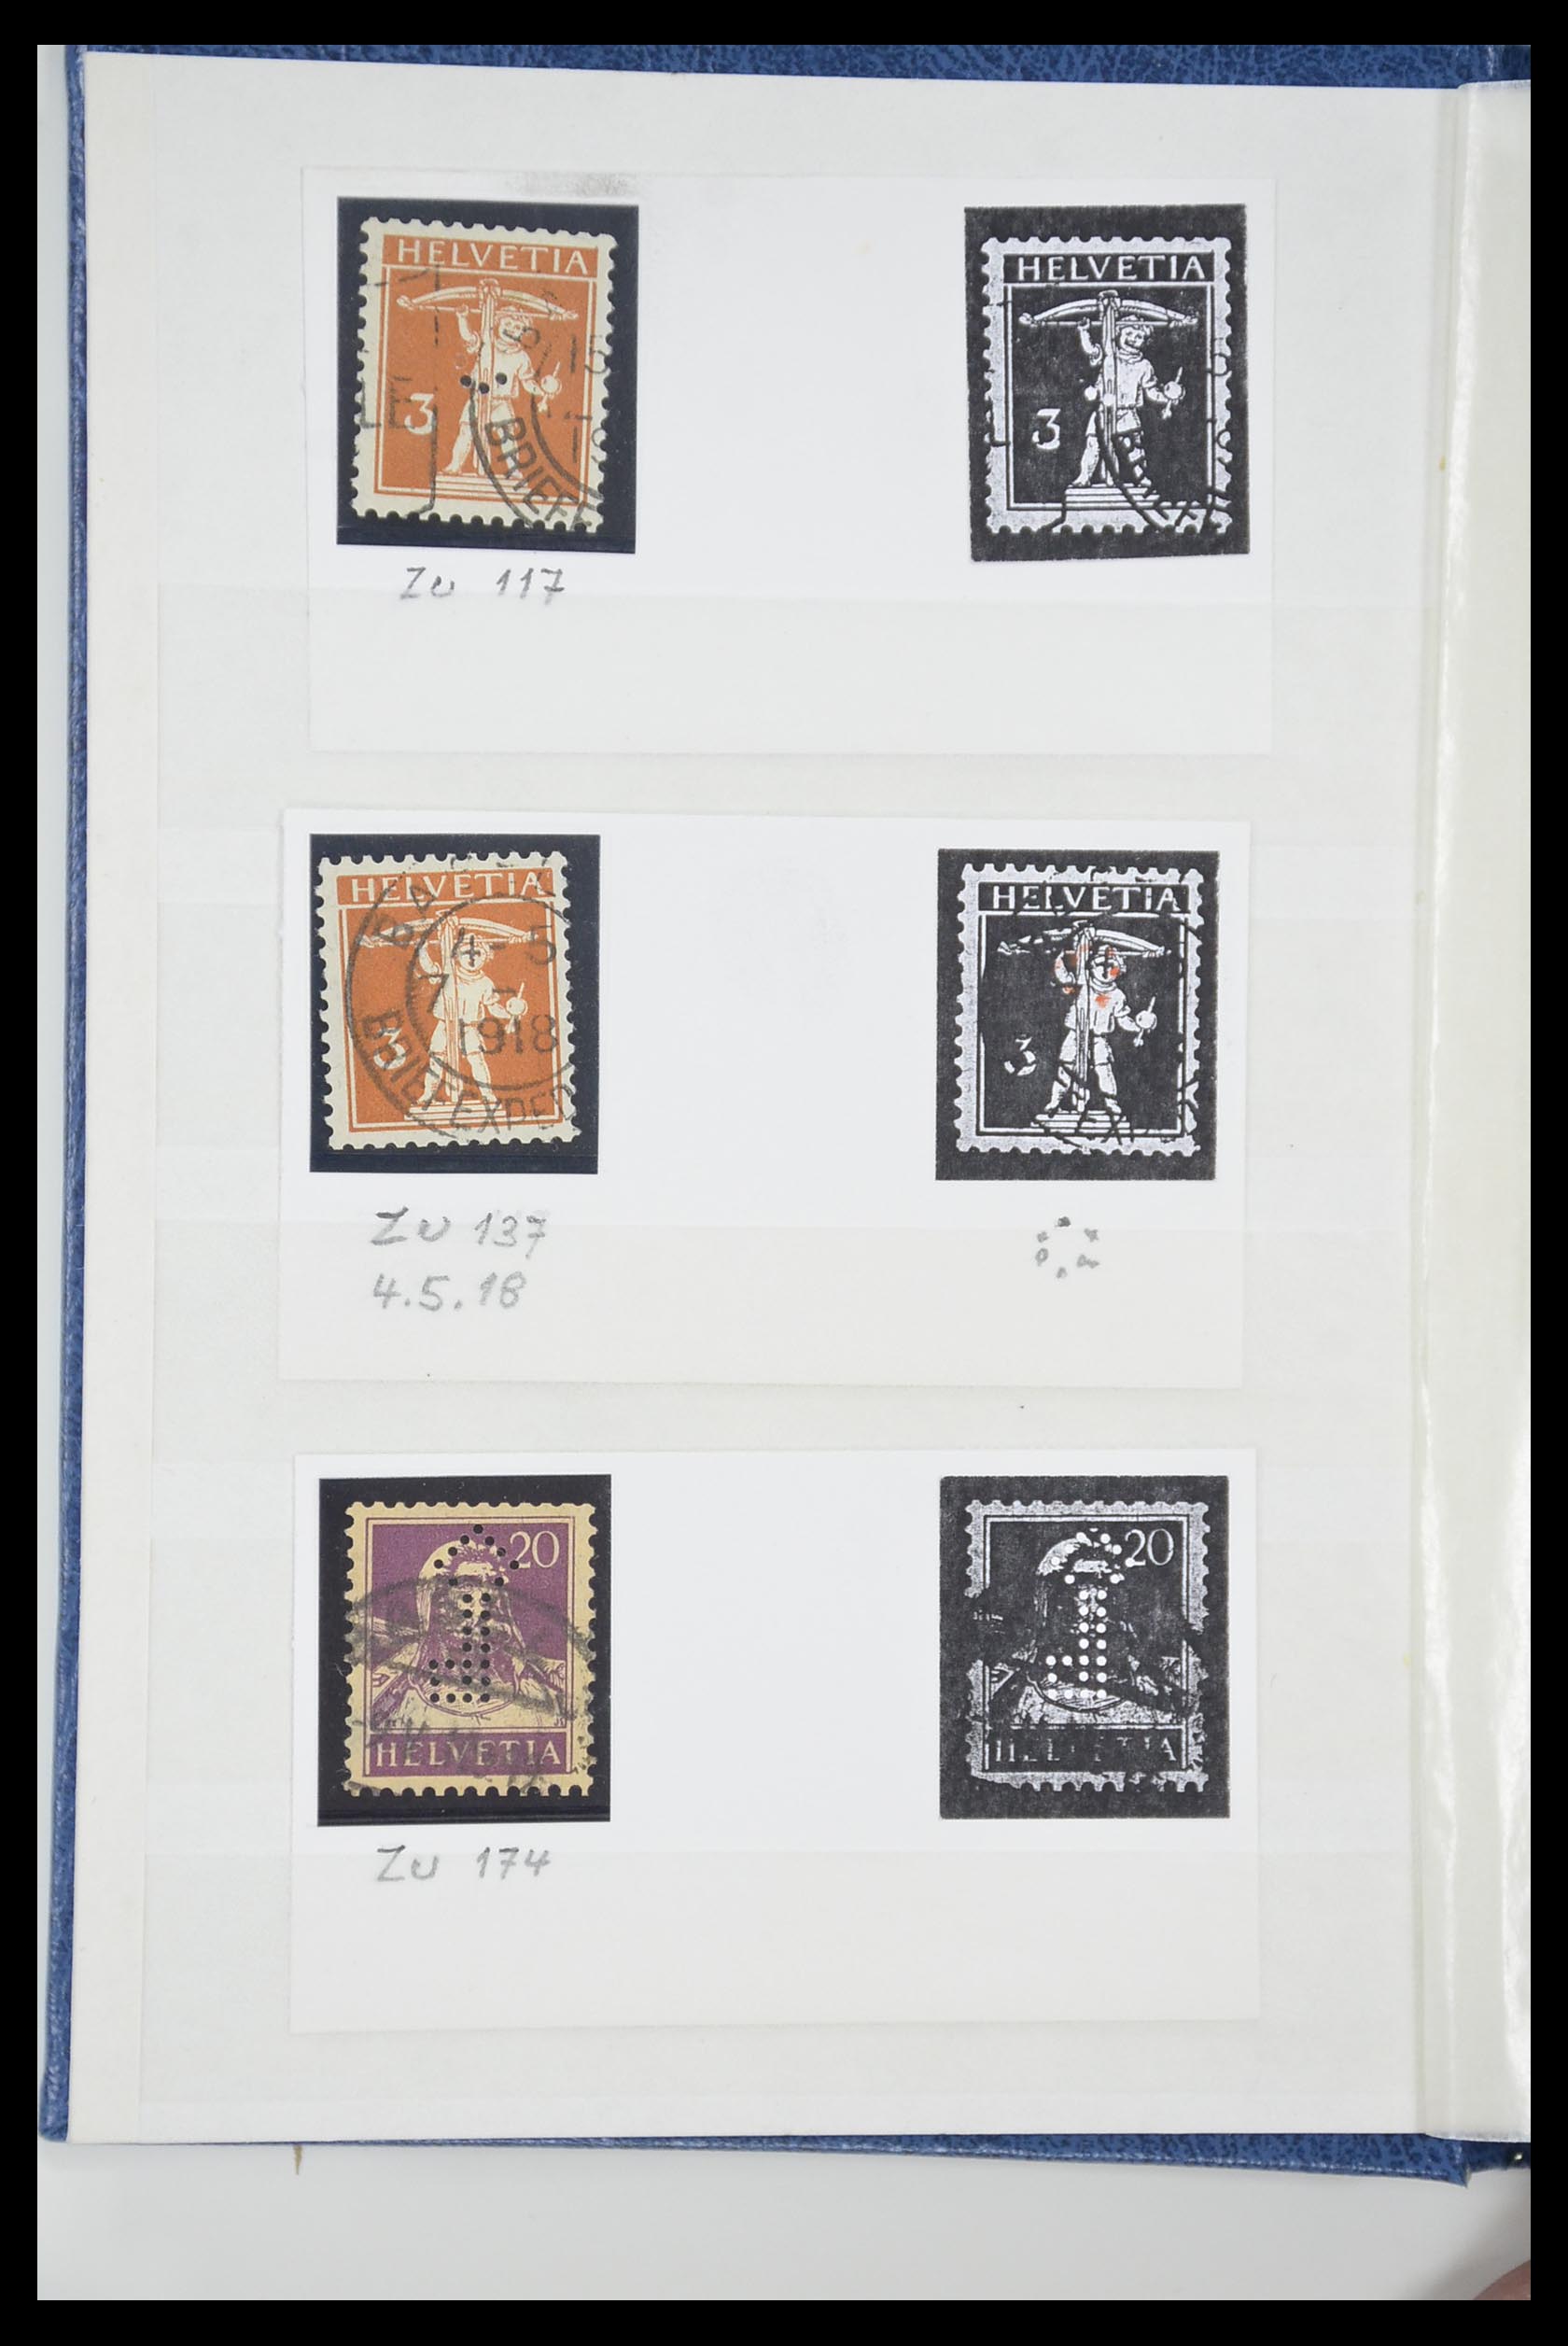 33284 042 - Stamp collection 33284 Switzerland better issues 1900-1995.